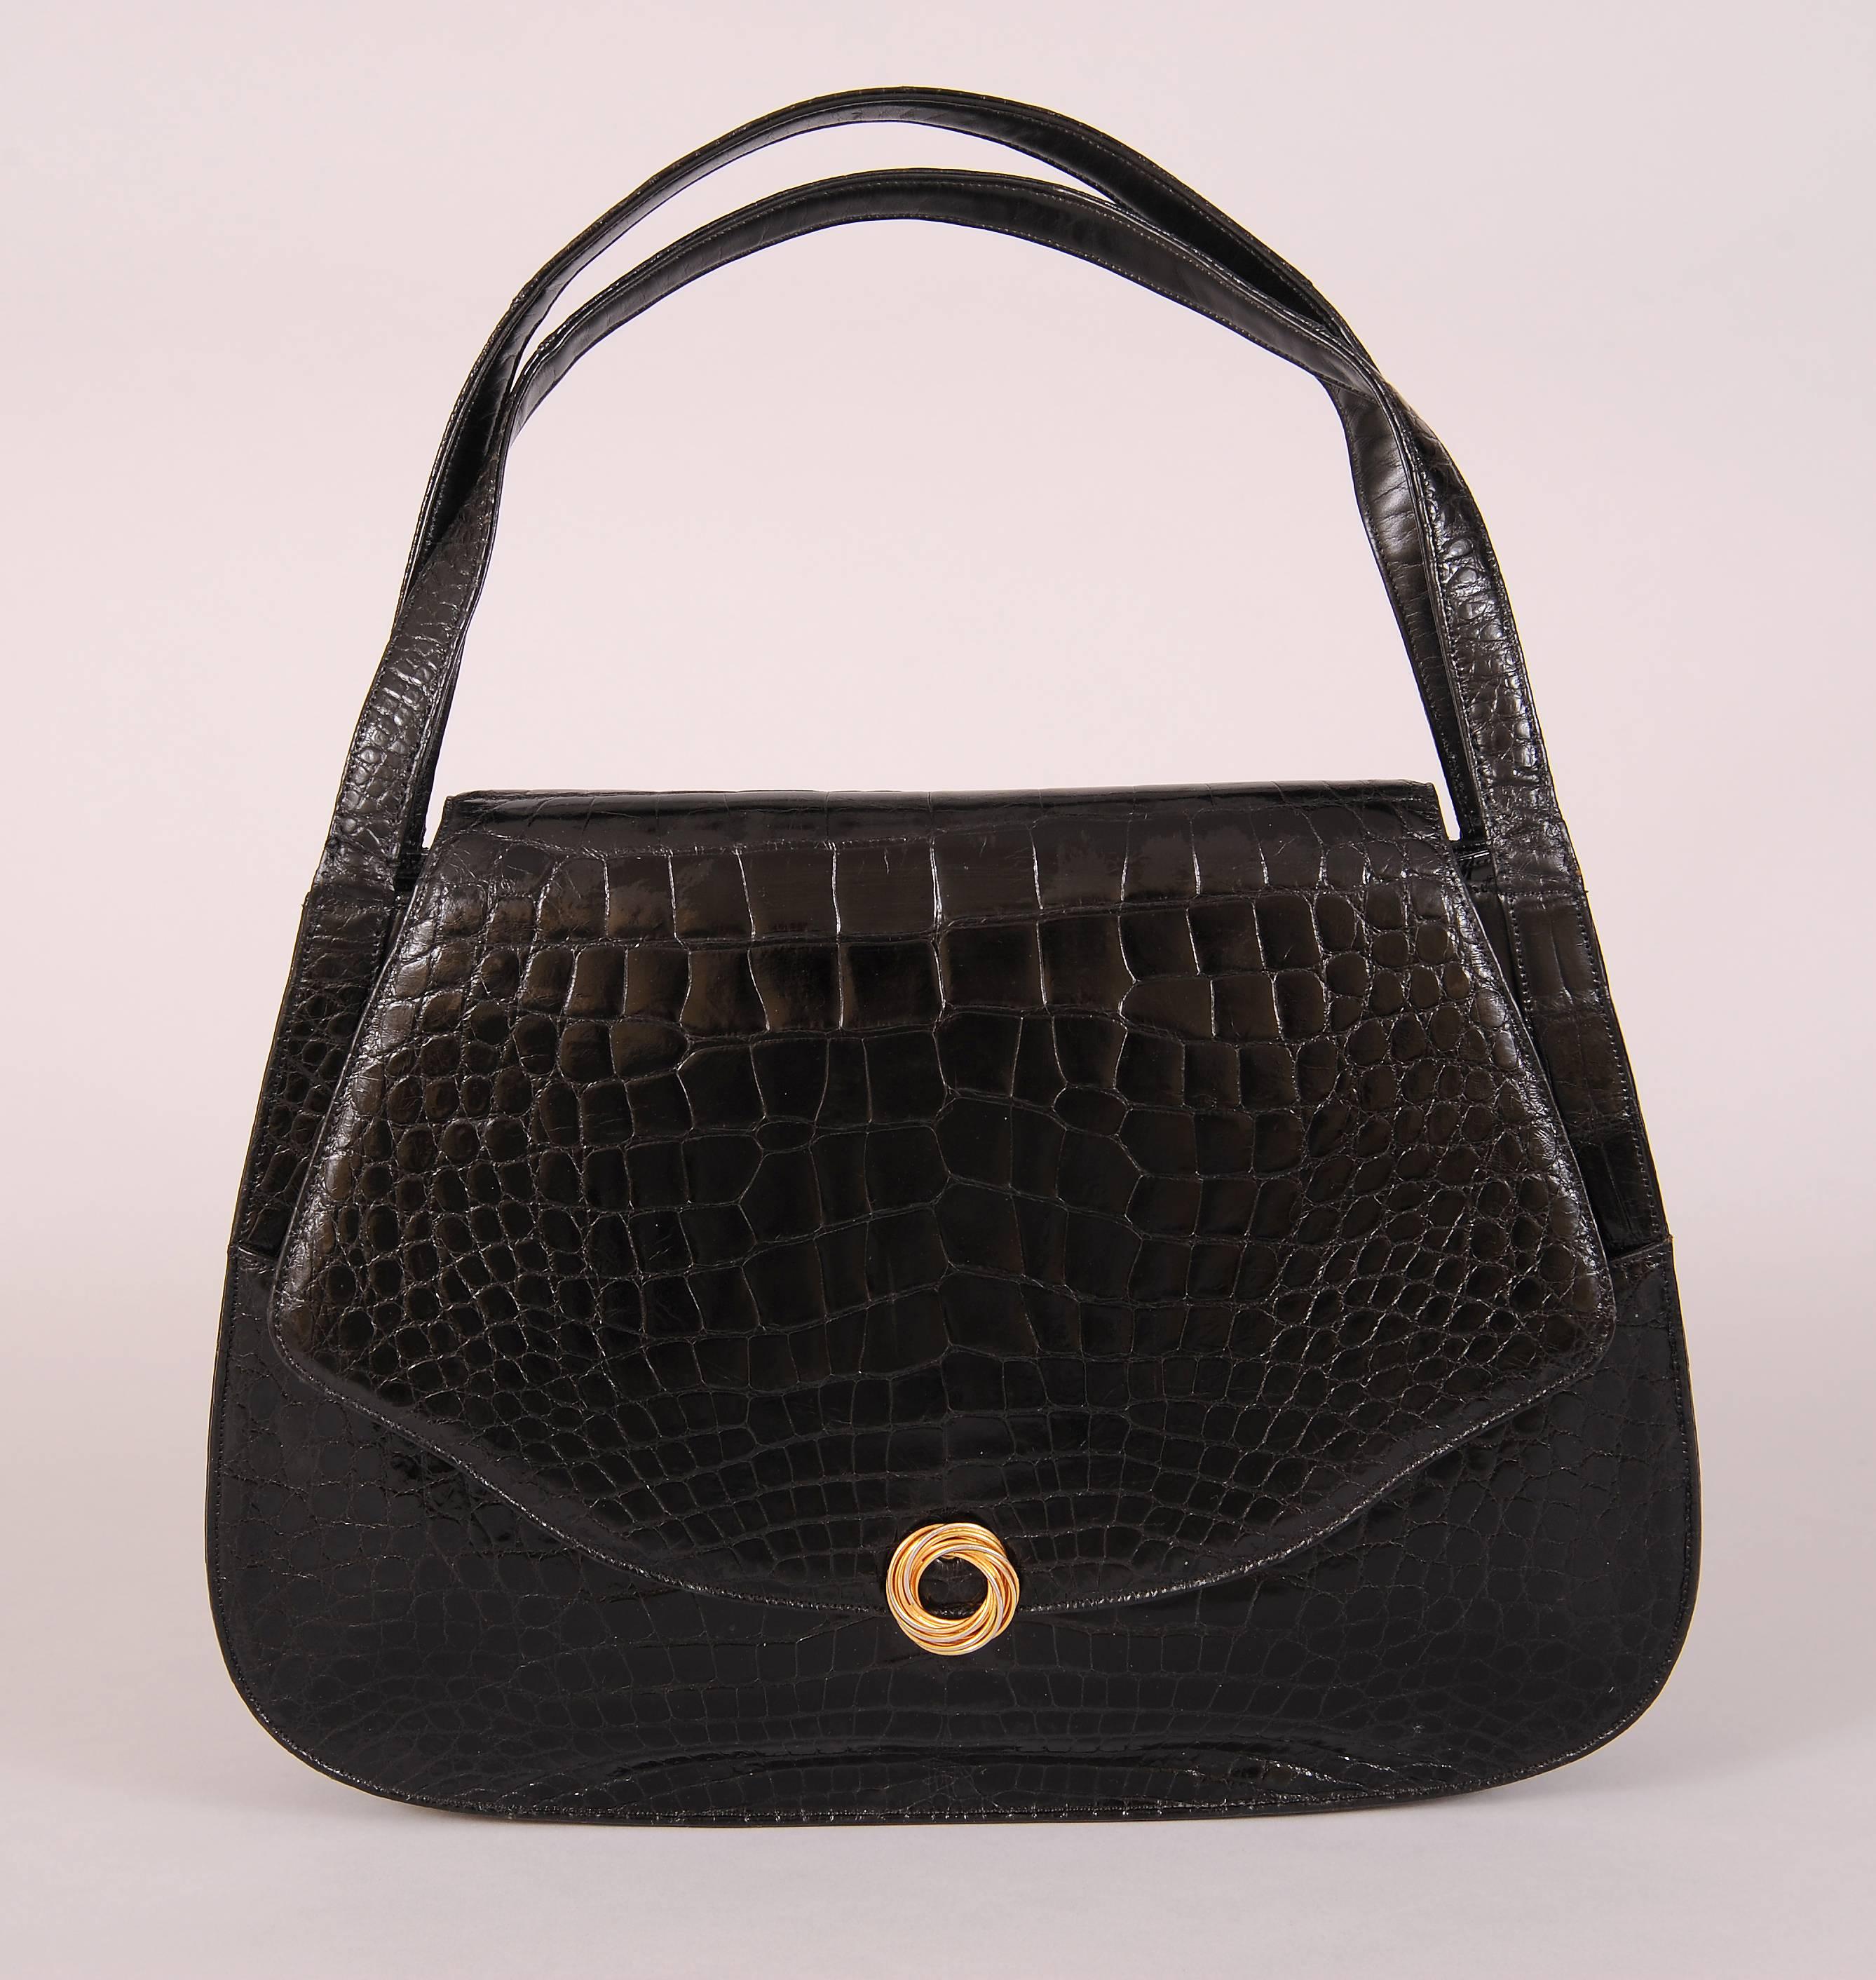 This large double handled alligator bag has a decorative gold clasp on the front and a large slip pocket on the back of the bag. There is another slip pocket on the front of the bag that is only visible when the bag is open. Inside there is a slip